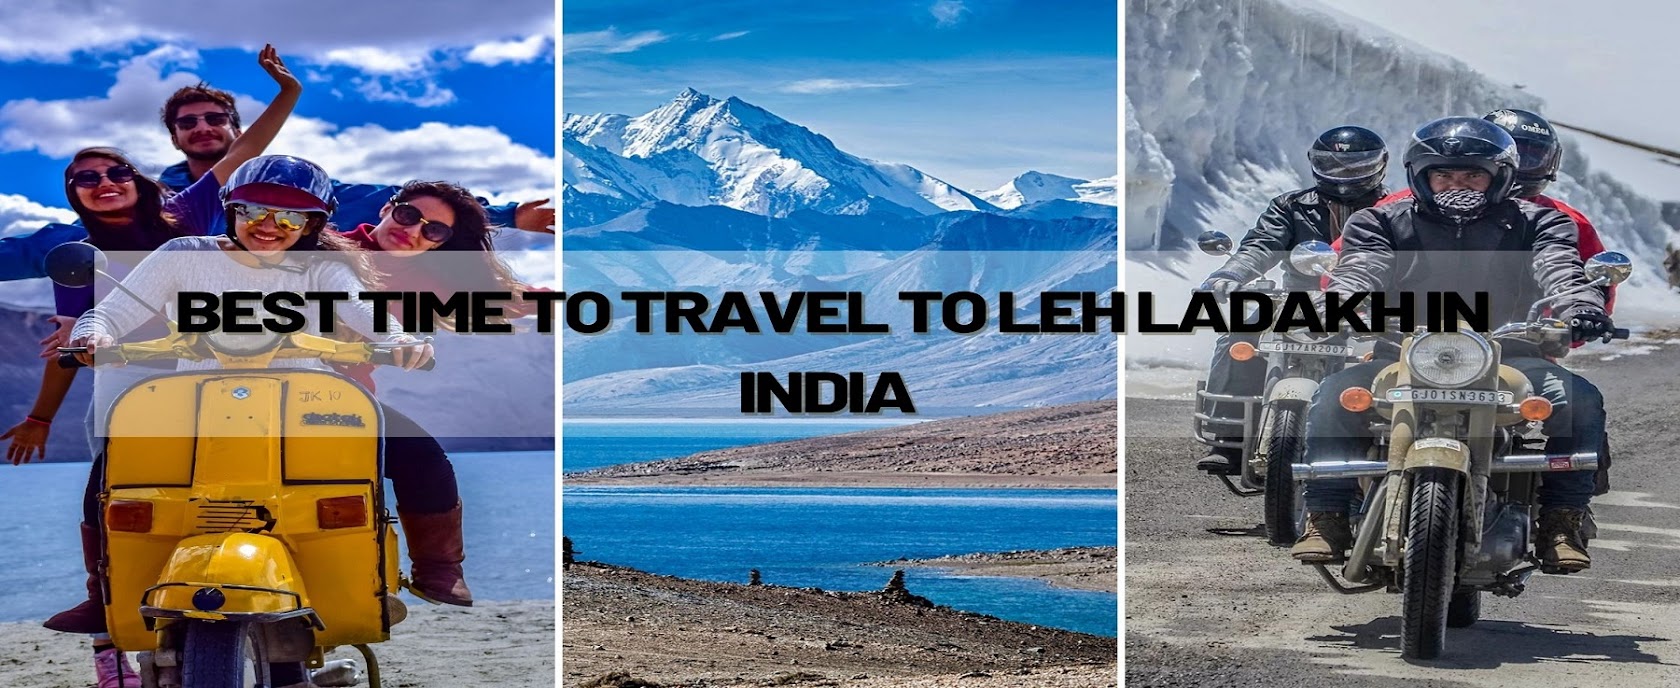 Best Time To Travel To Leh Ladakh In India